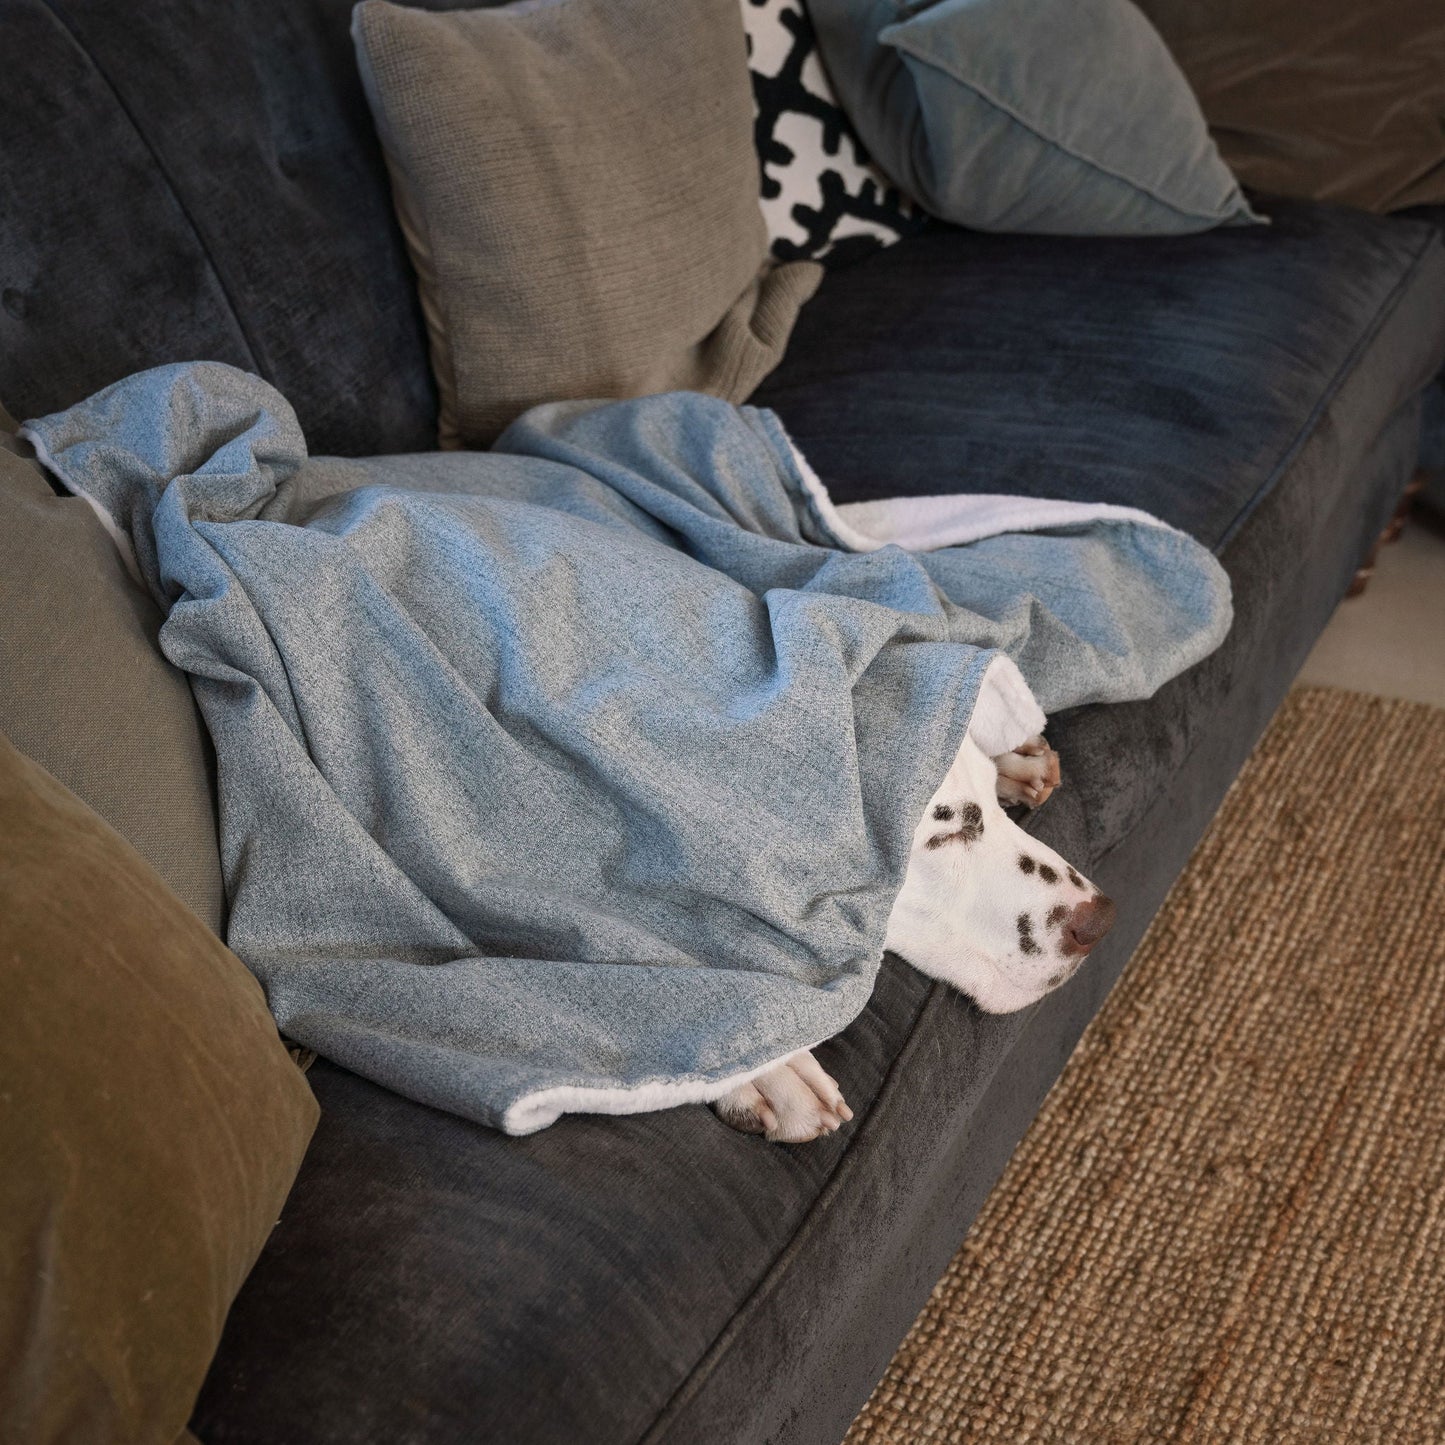 Discover The Perfect Blanket For Dogs! Help Delve Into a Cosy Burrow After Walks, Bath-Time or a Lazy Day Indoors! With Our Inchmurrin Dog Blanket In Stunning Light Iceberg! Available To Personalise Now at Lords & Labradors 